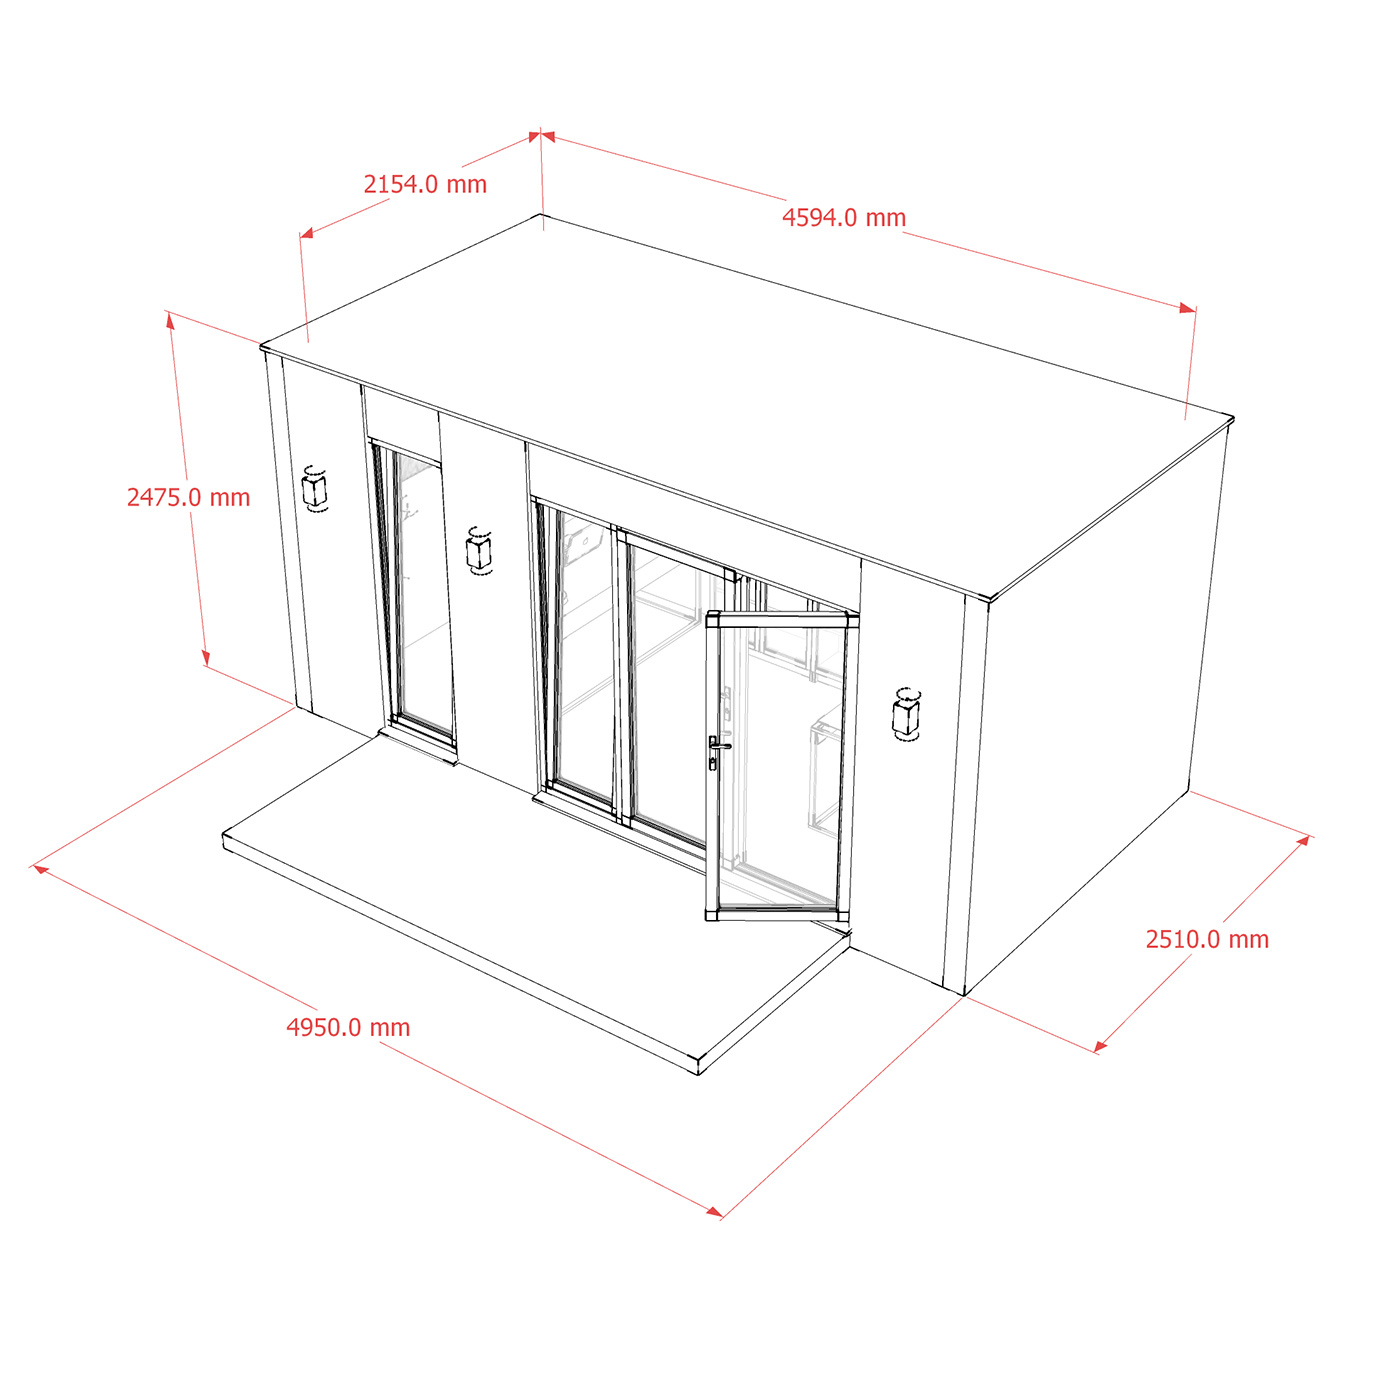 Exterior dimensions of 2.6m by 5.0m garden room